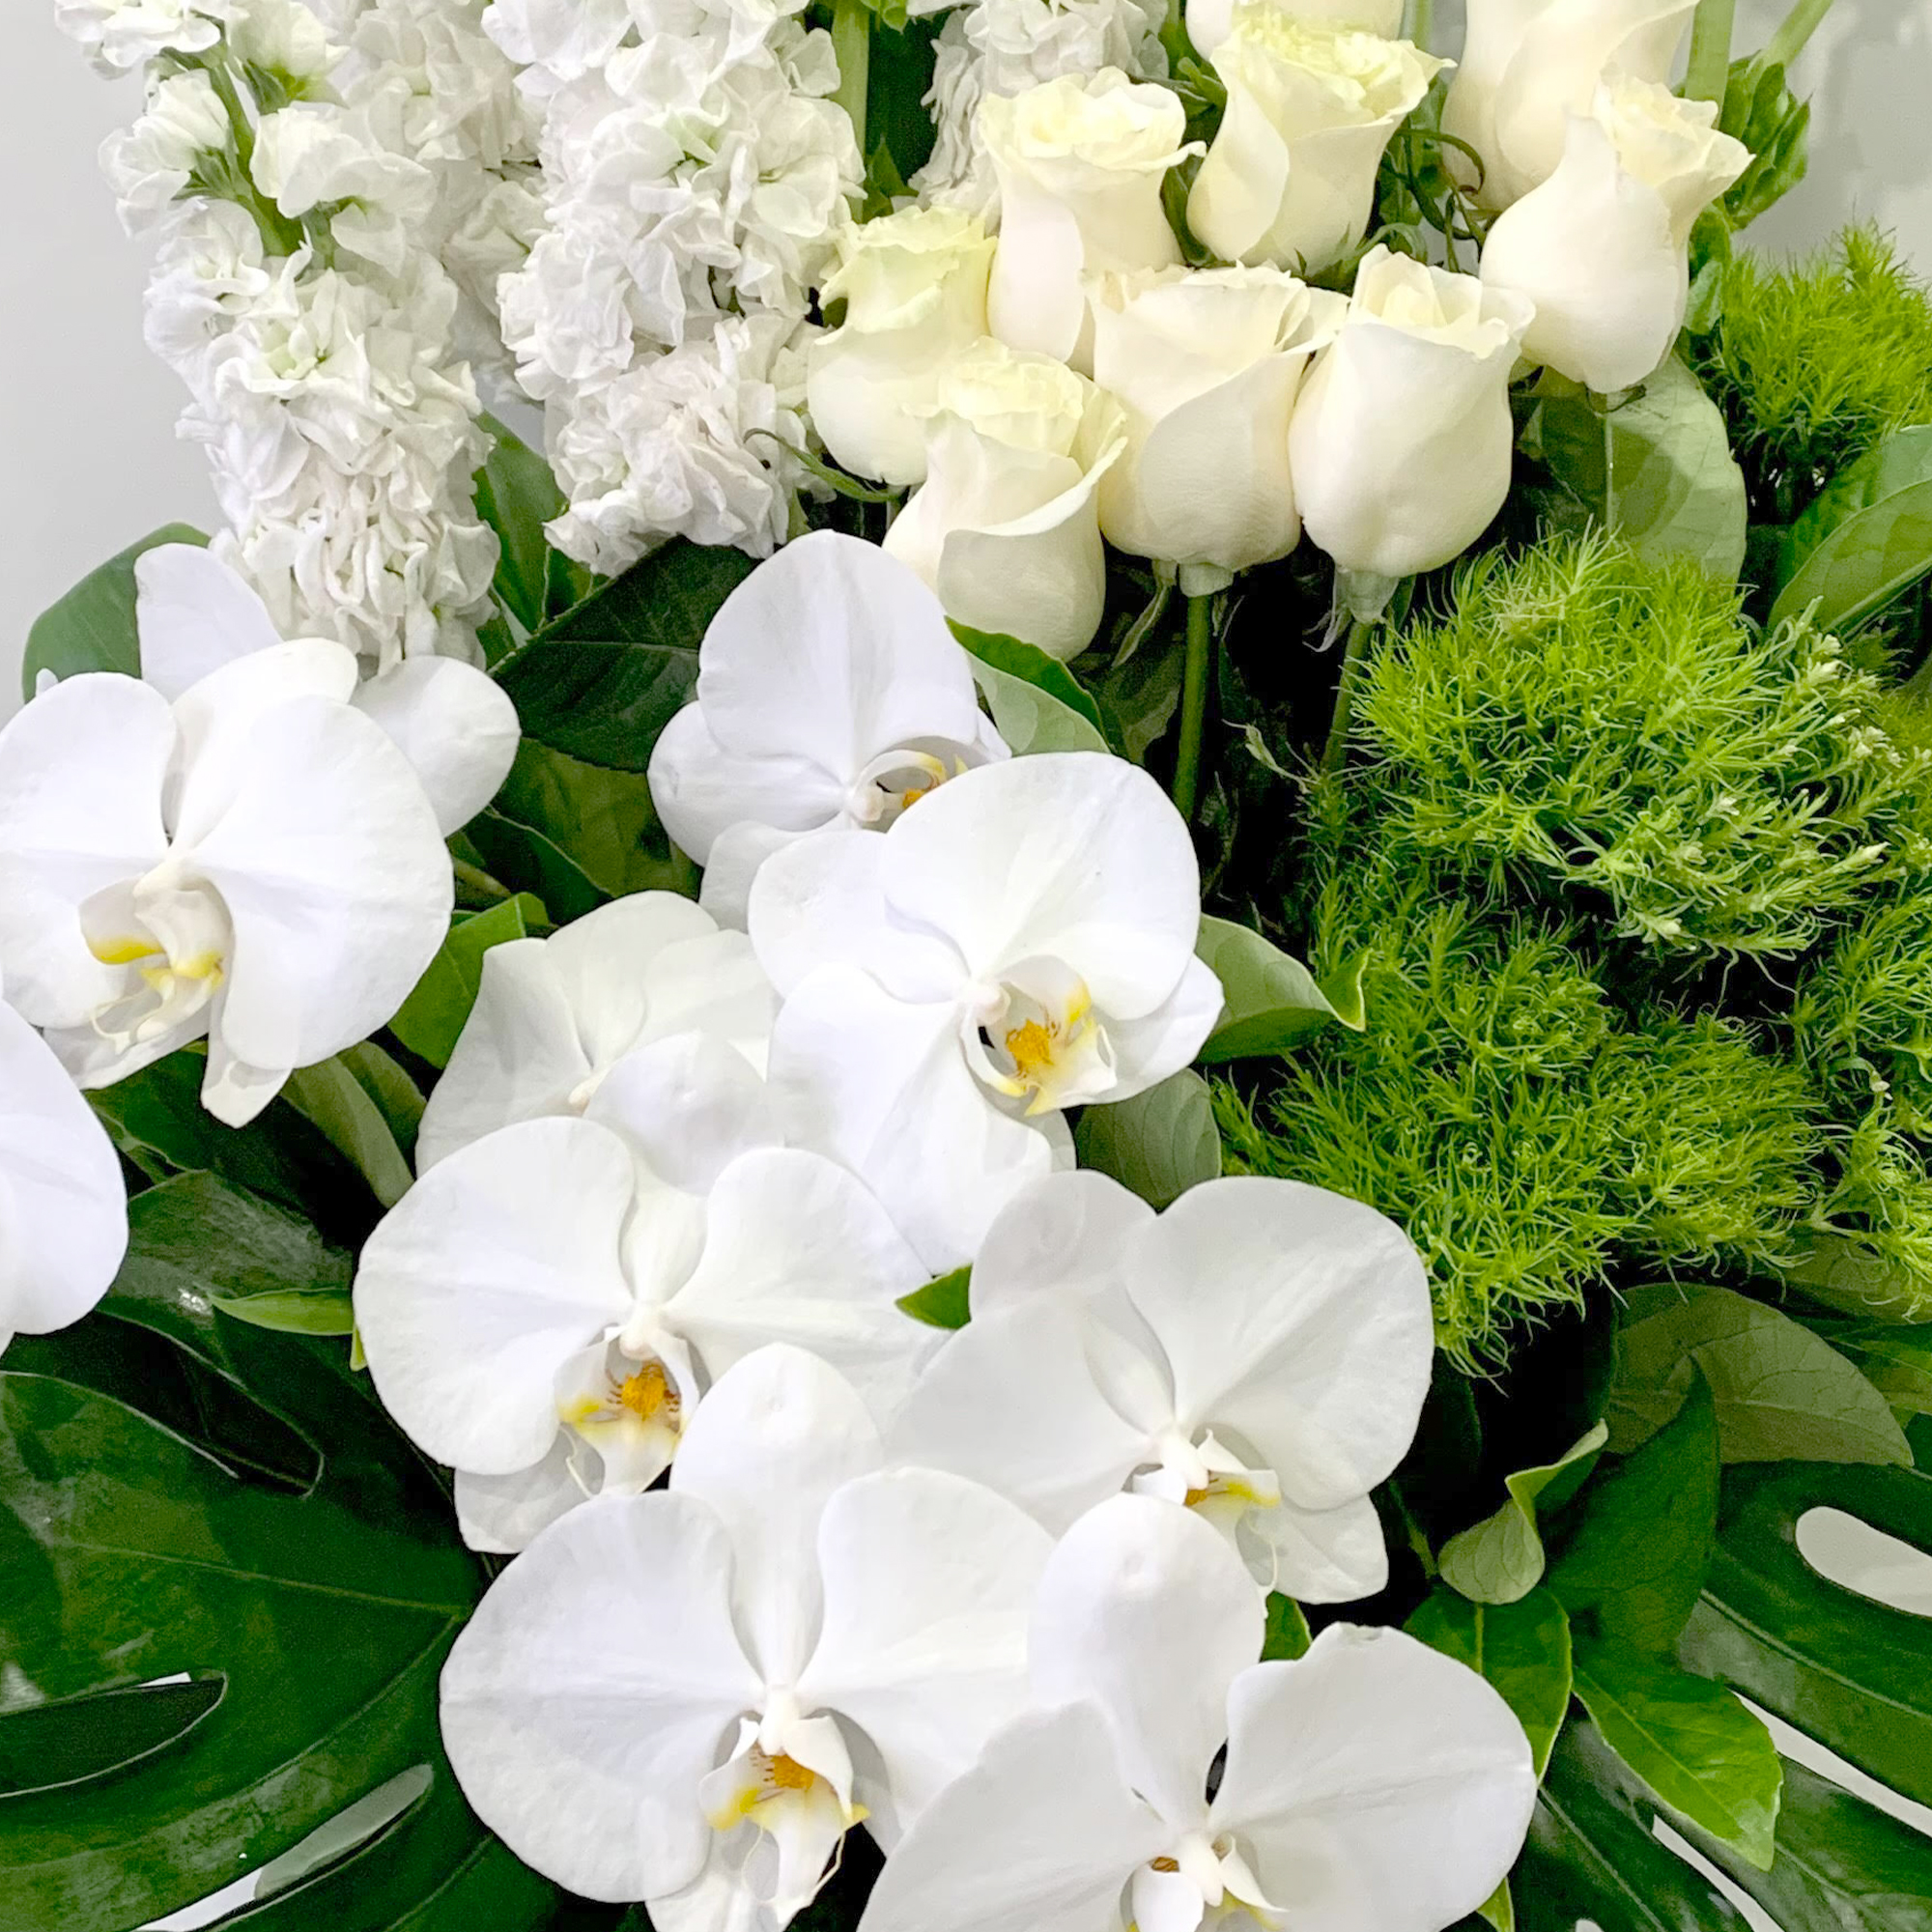 Showing Sympathy With Funeral Flowers